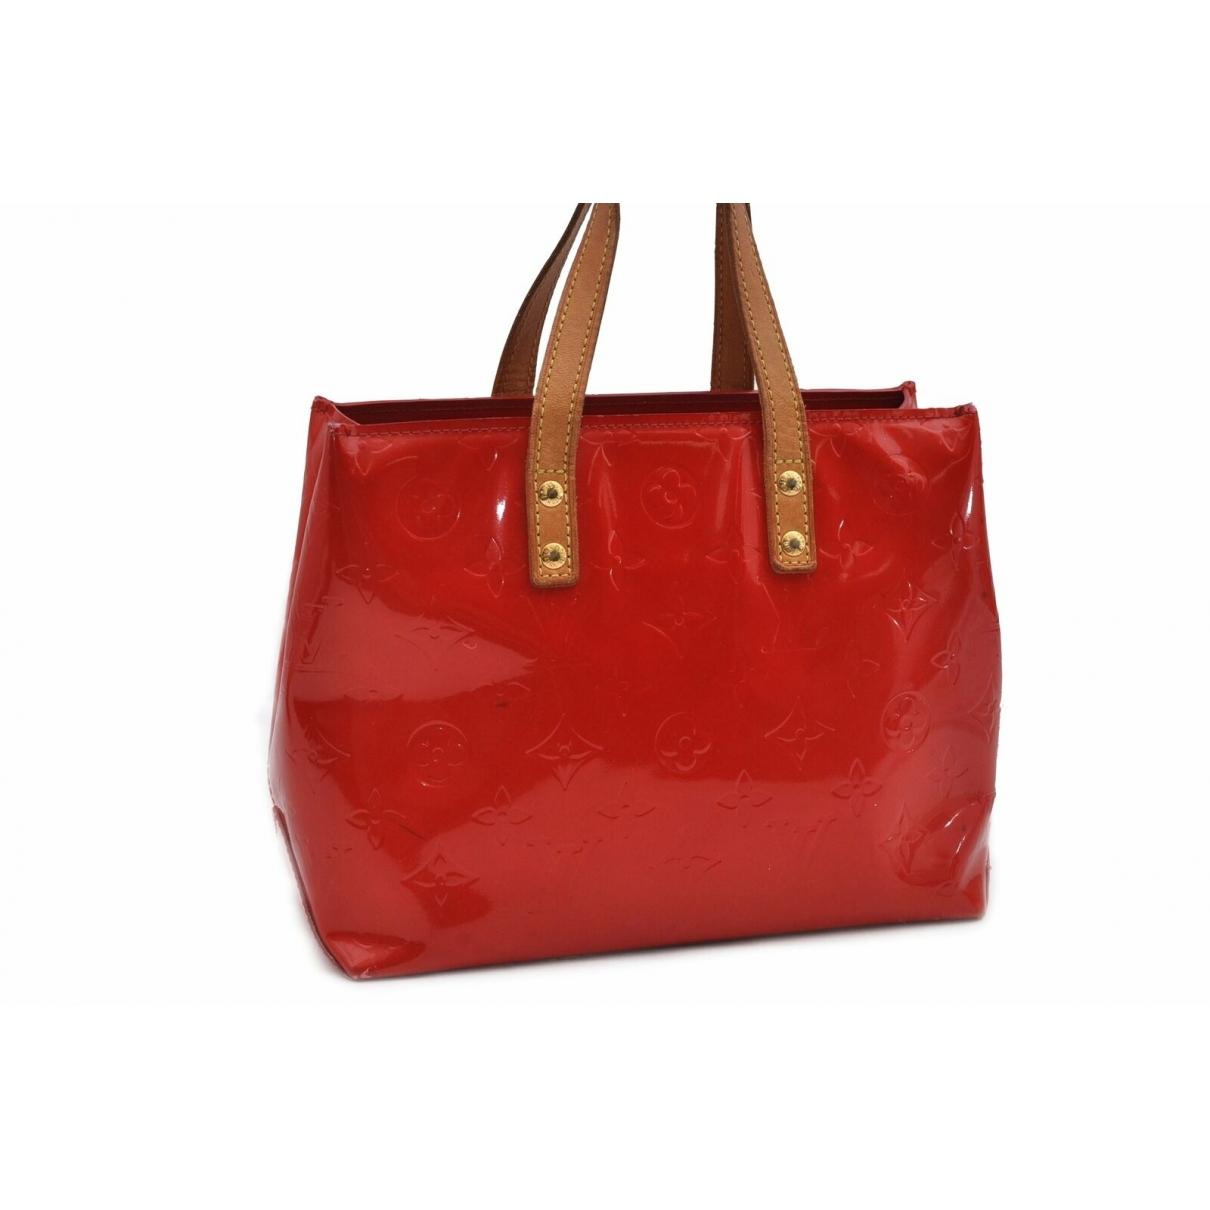 Louis Vuitton Vintage Houston Red Patent Leather Handbag in Red - Lyst